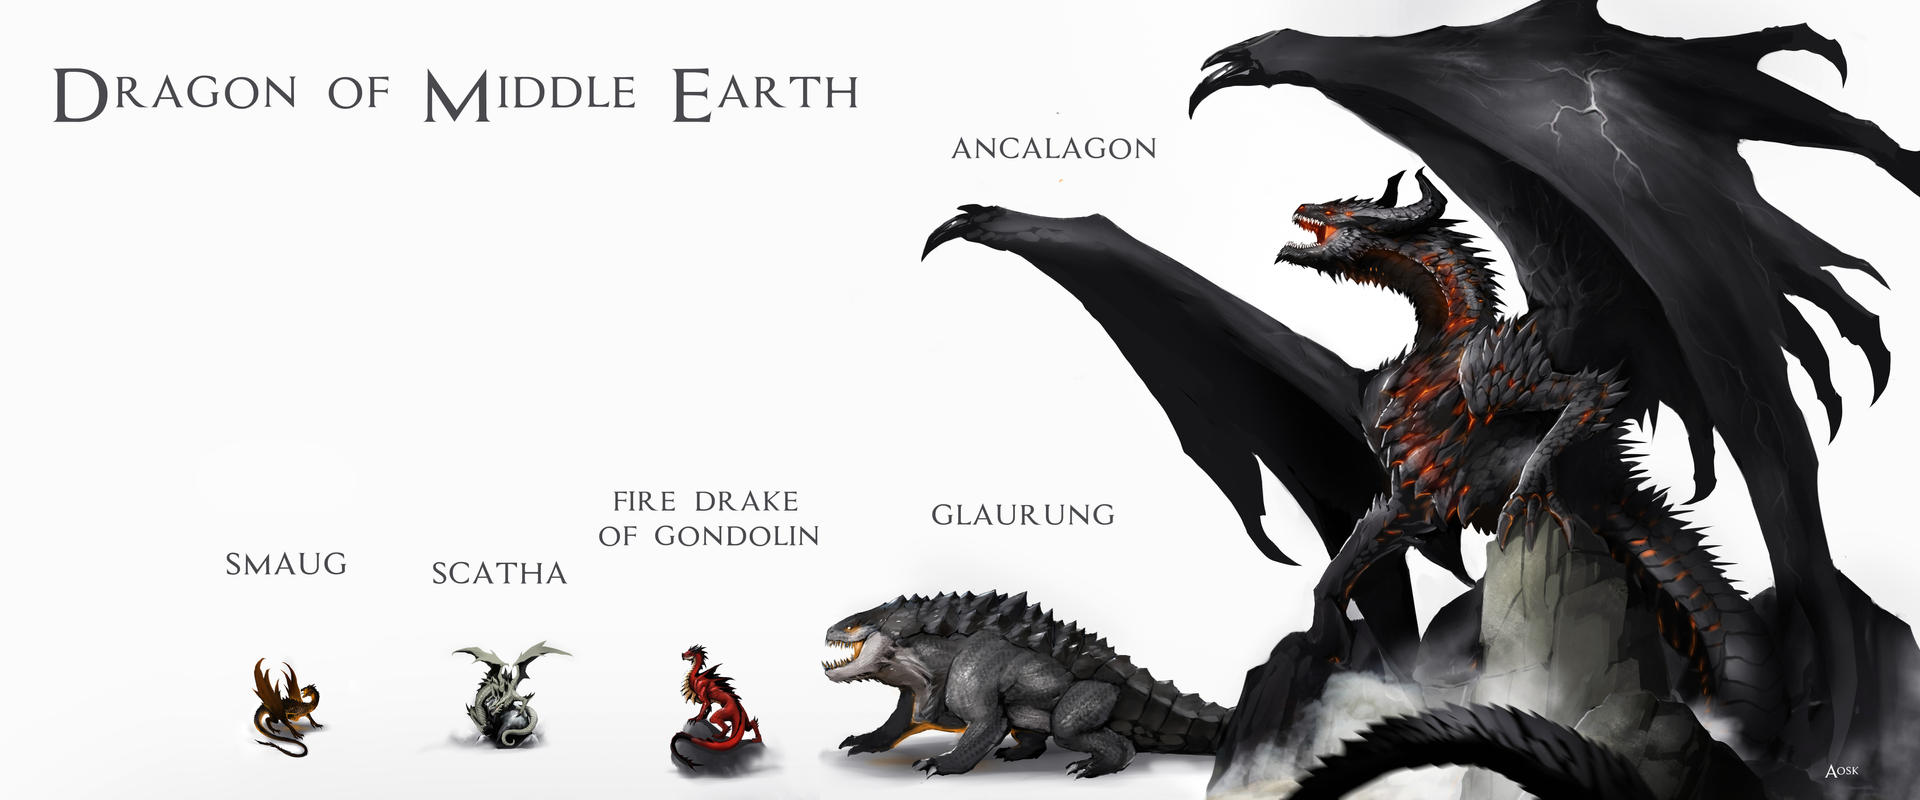 Fire Drake of Gondolin Glaurung Smaug Scatha GAG Dragon of the War of Wrath  Ancalagon the Black Size of the Dragons of Middle Earth. - iFunny